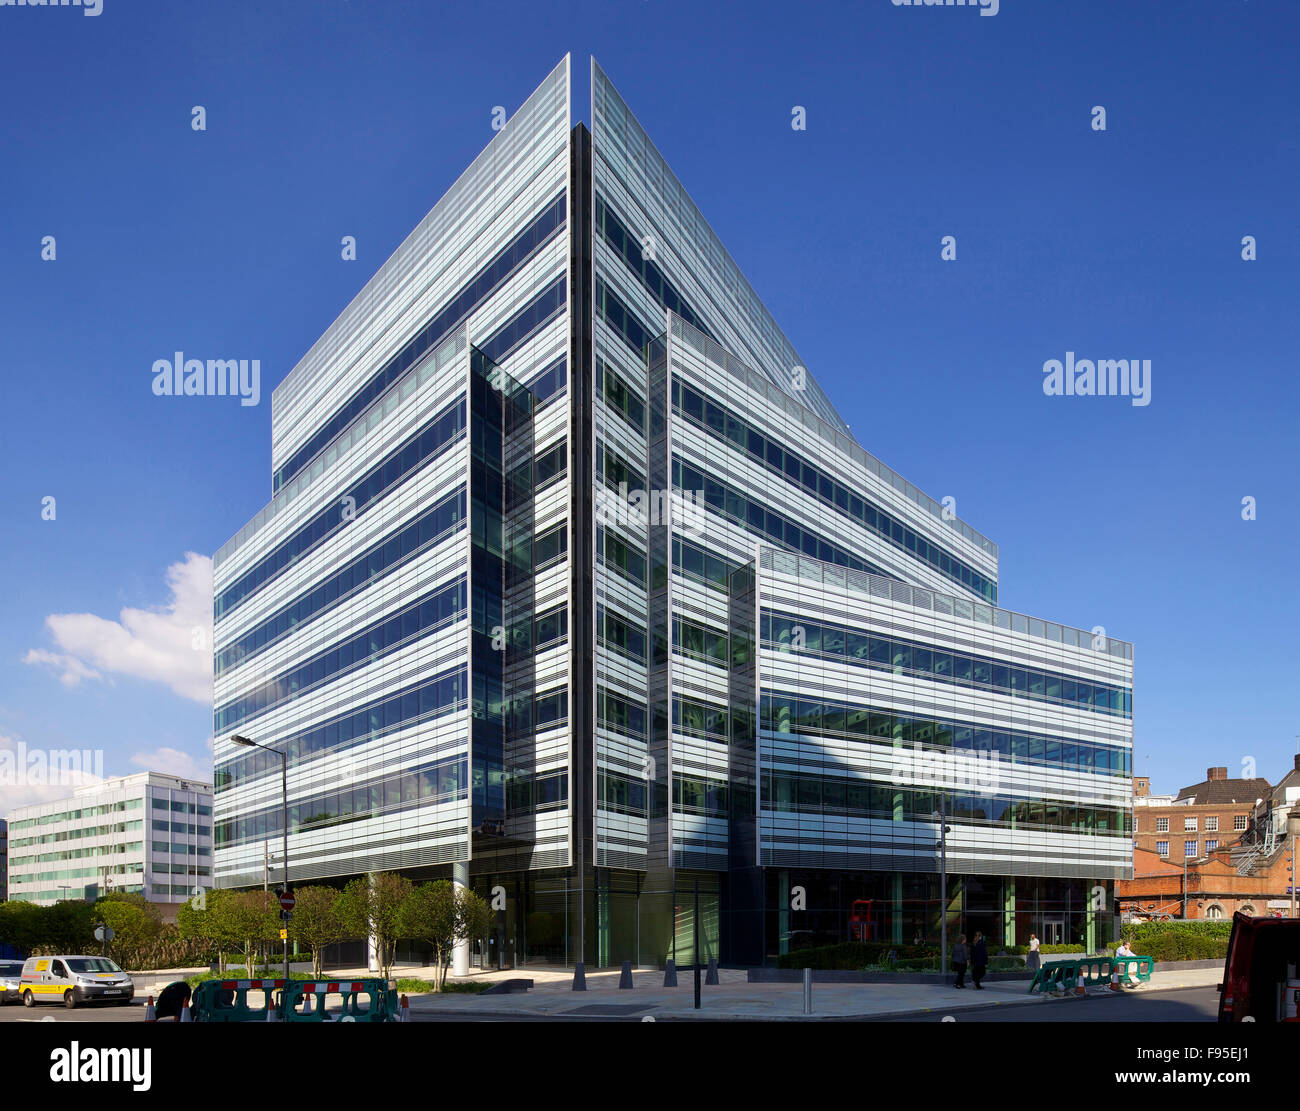 10 Hammersmith Grove W6 London. New office development by Wates Construction for Development Securities in Hammersmith, London. Exterior view of office building. Contemporary architecture with a glass facade. Stock Photo